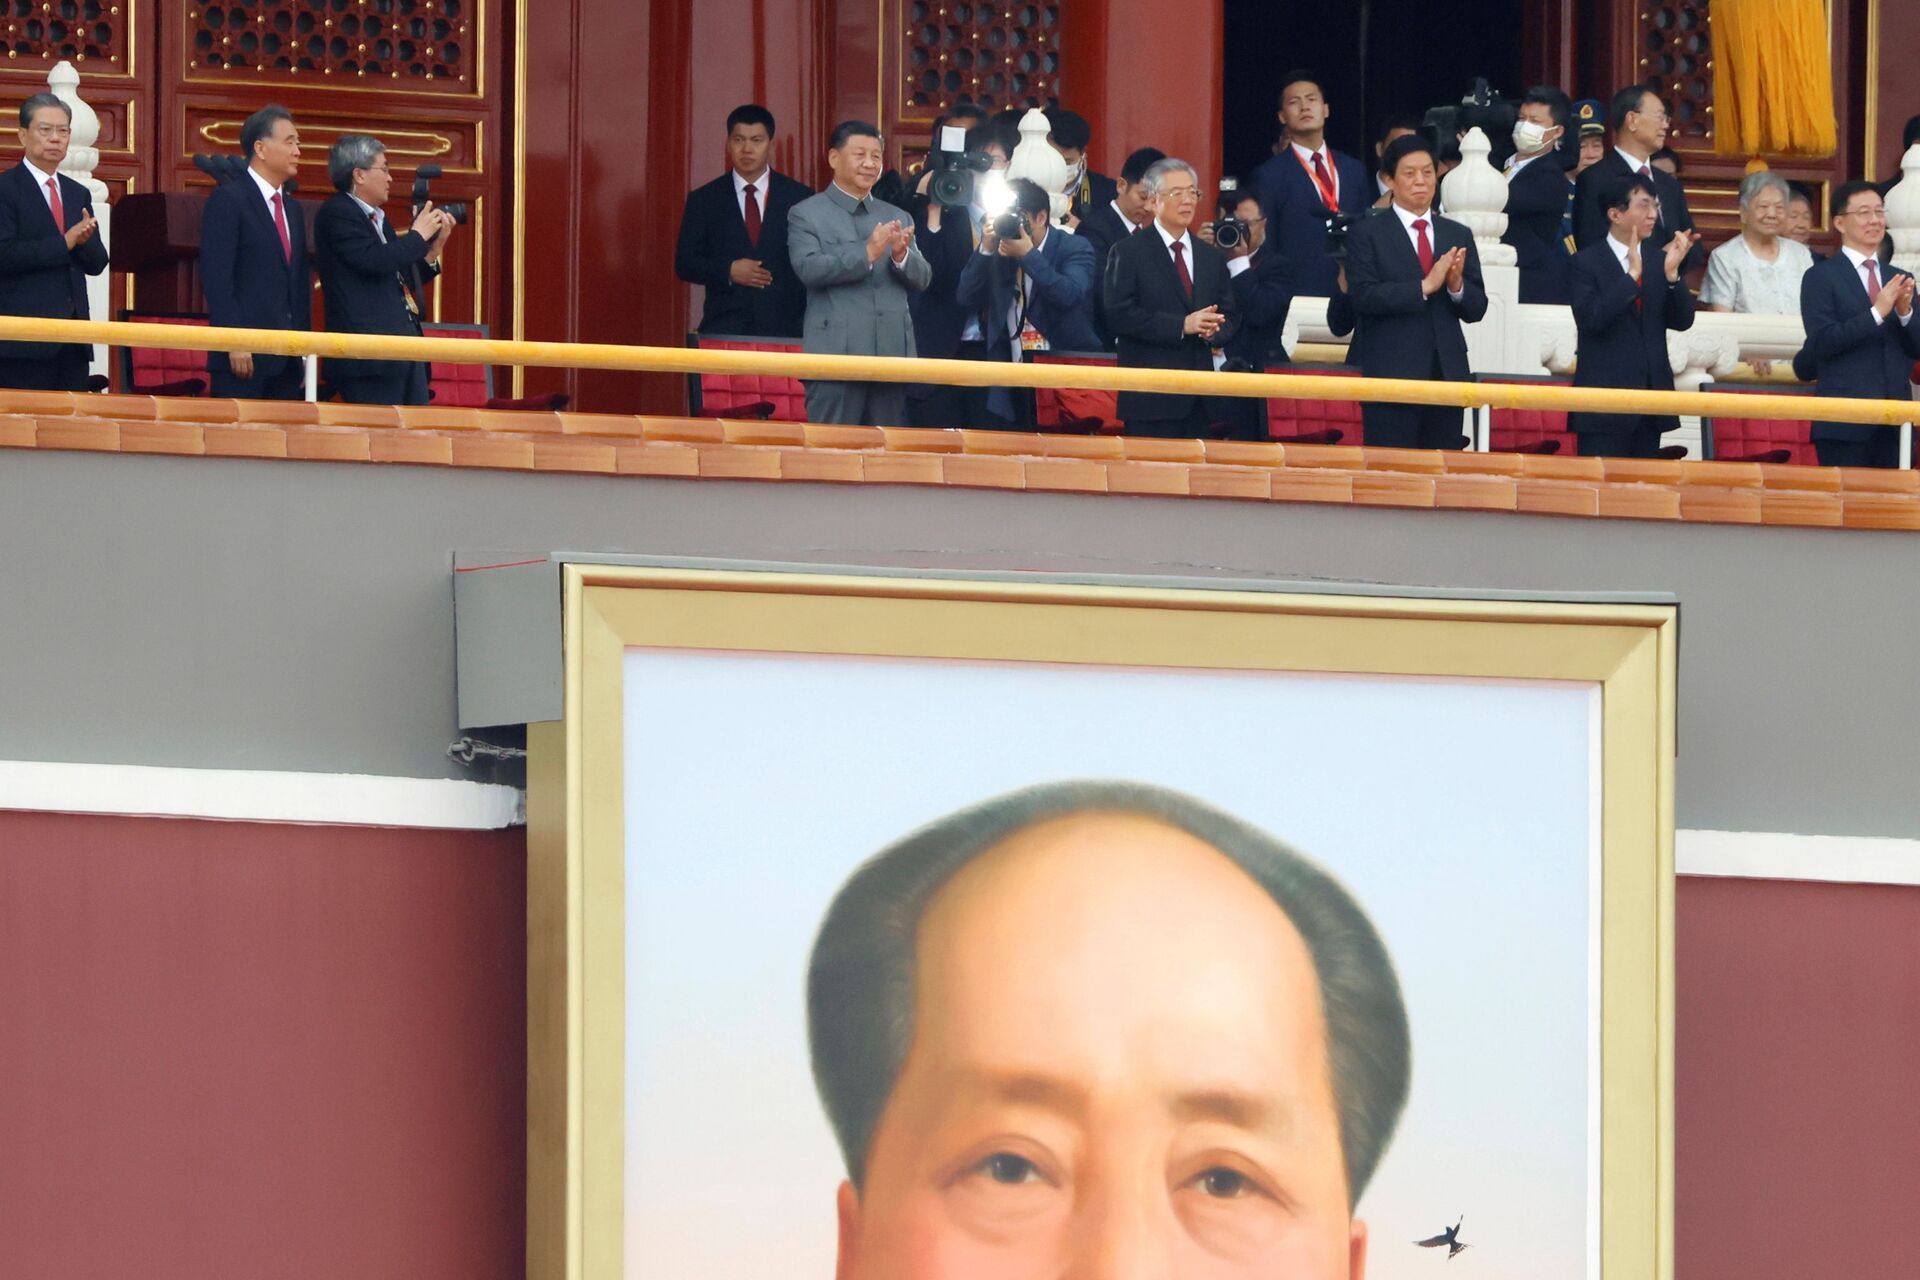 Chinese President Xi Jinping applauds above a giant portrait of late Chinese chairman Mao Zedong at the event marking the 100th founding anniversary of the Communist Party of China, on Tiananmen Square in Beijing, China 1 July 2021.  - Sputnik International, 1920, 07.09.2021